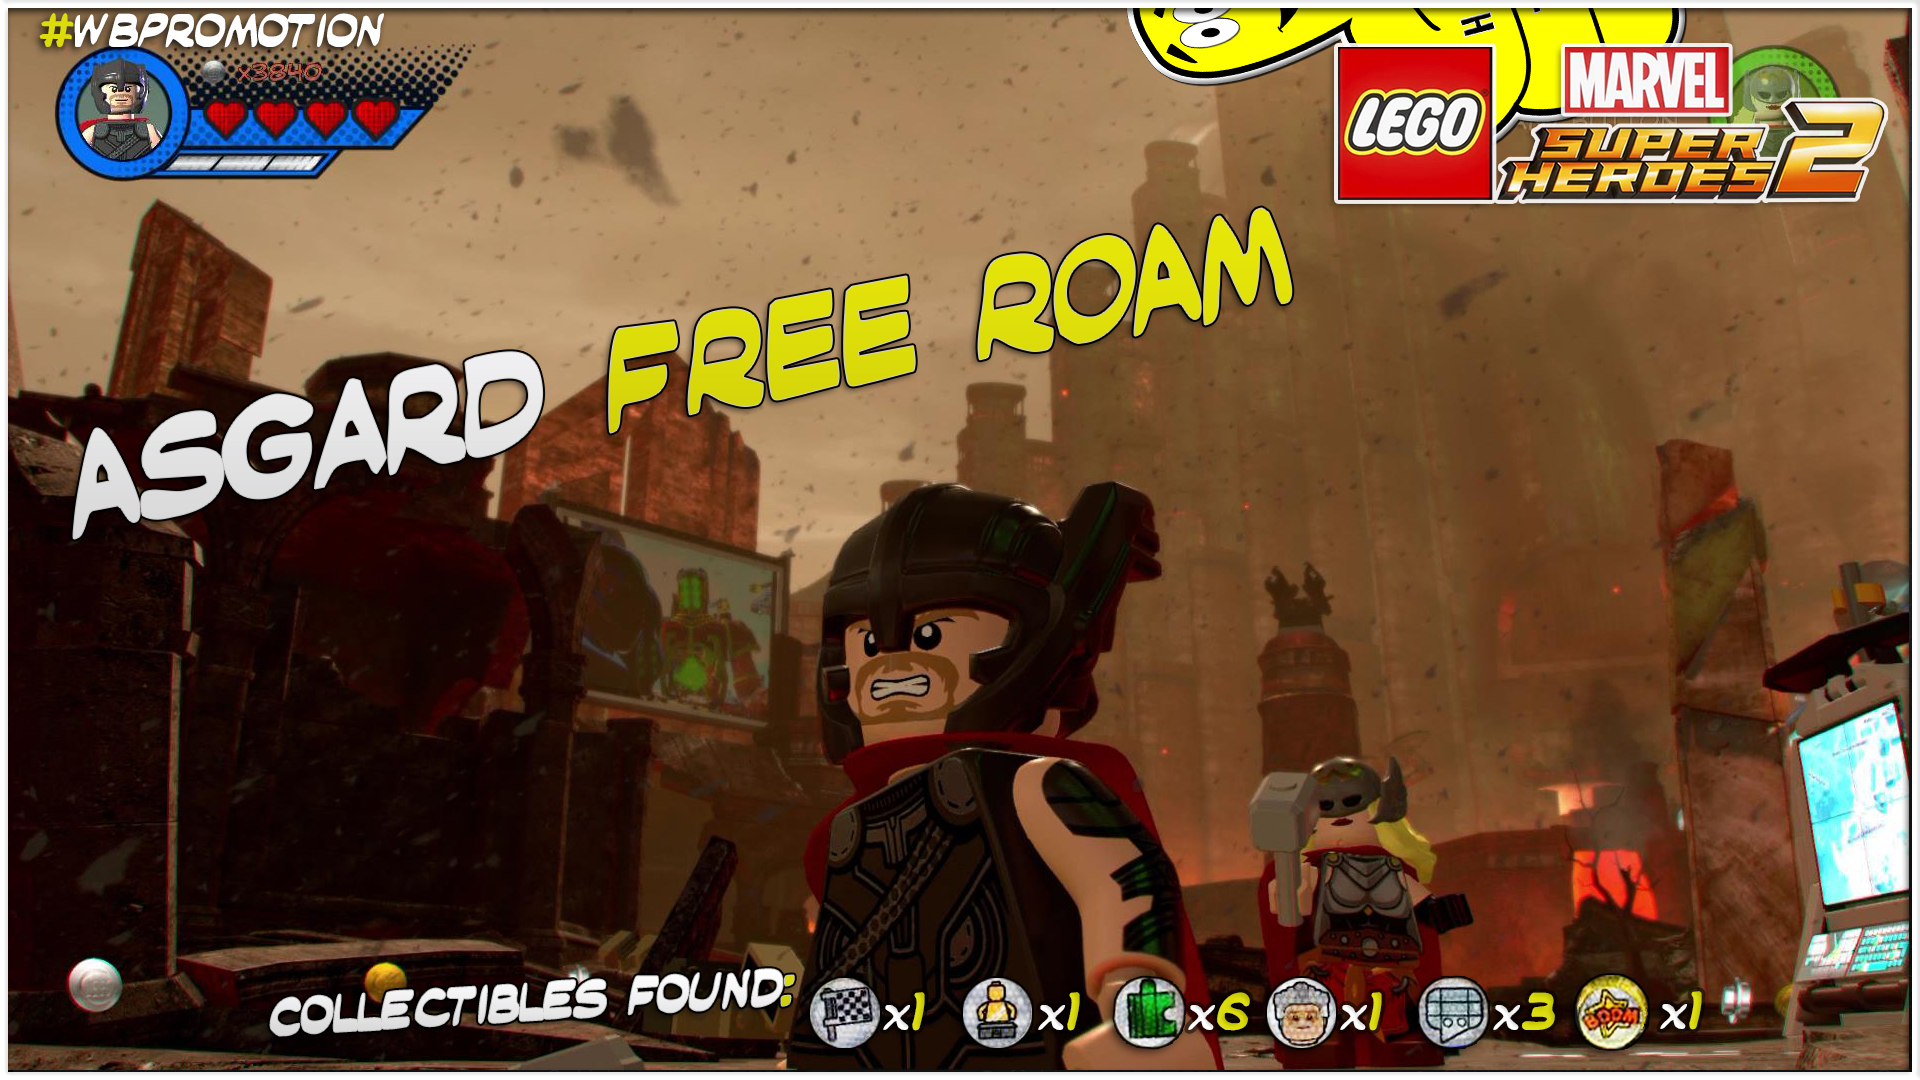 Forkludret Periodisk Invitere Lego Marvel Superheroes 2: Asgard FREE ROAM (All Collectibles) – HTG –  Happy Thumbs Gaming